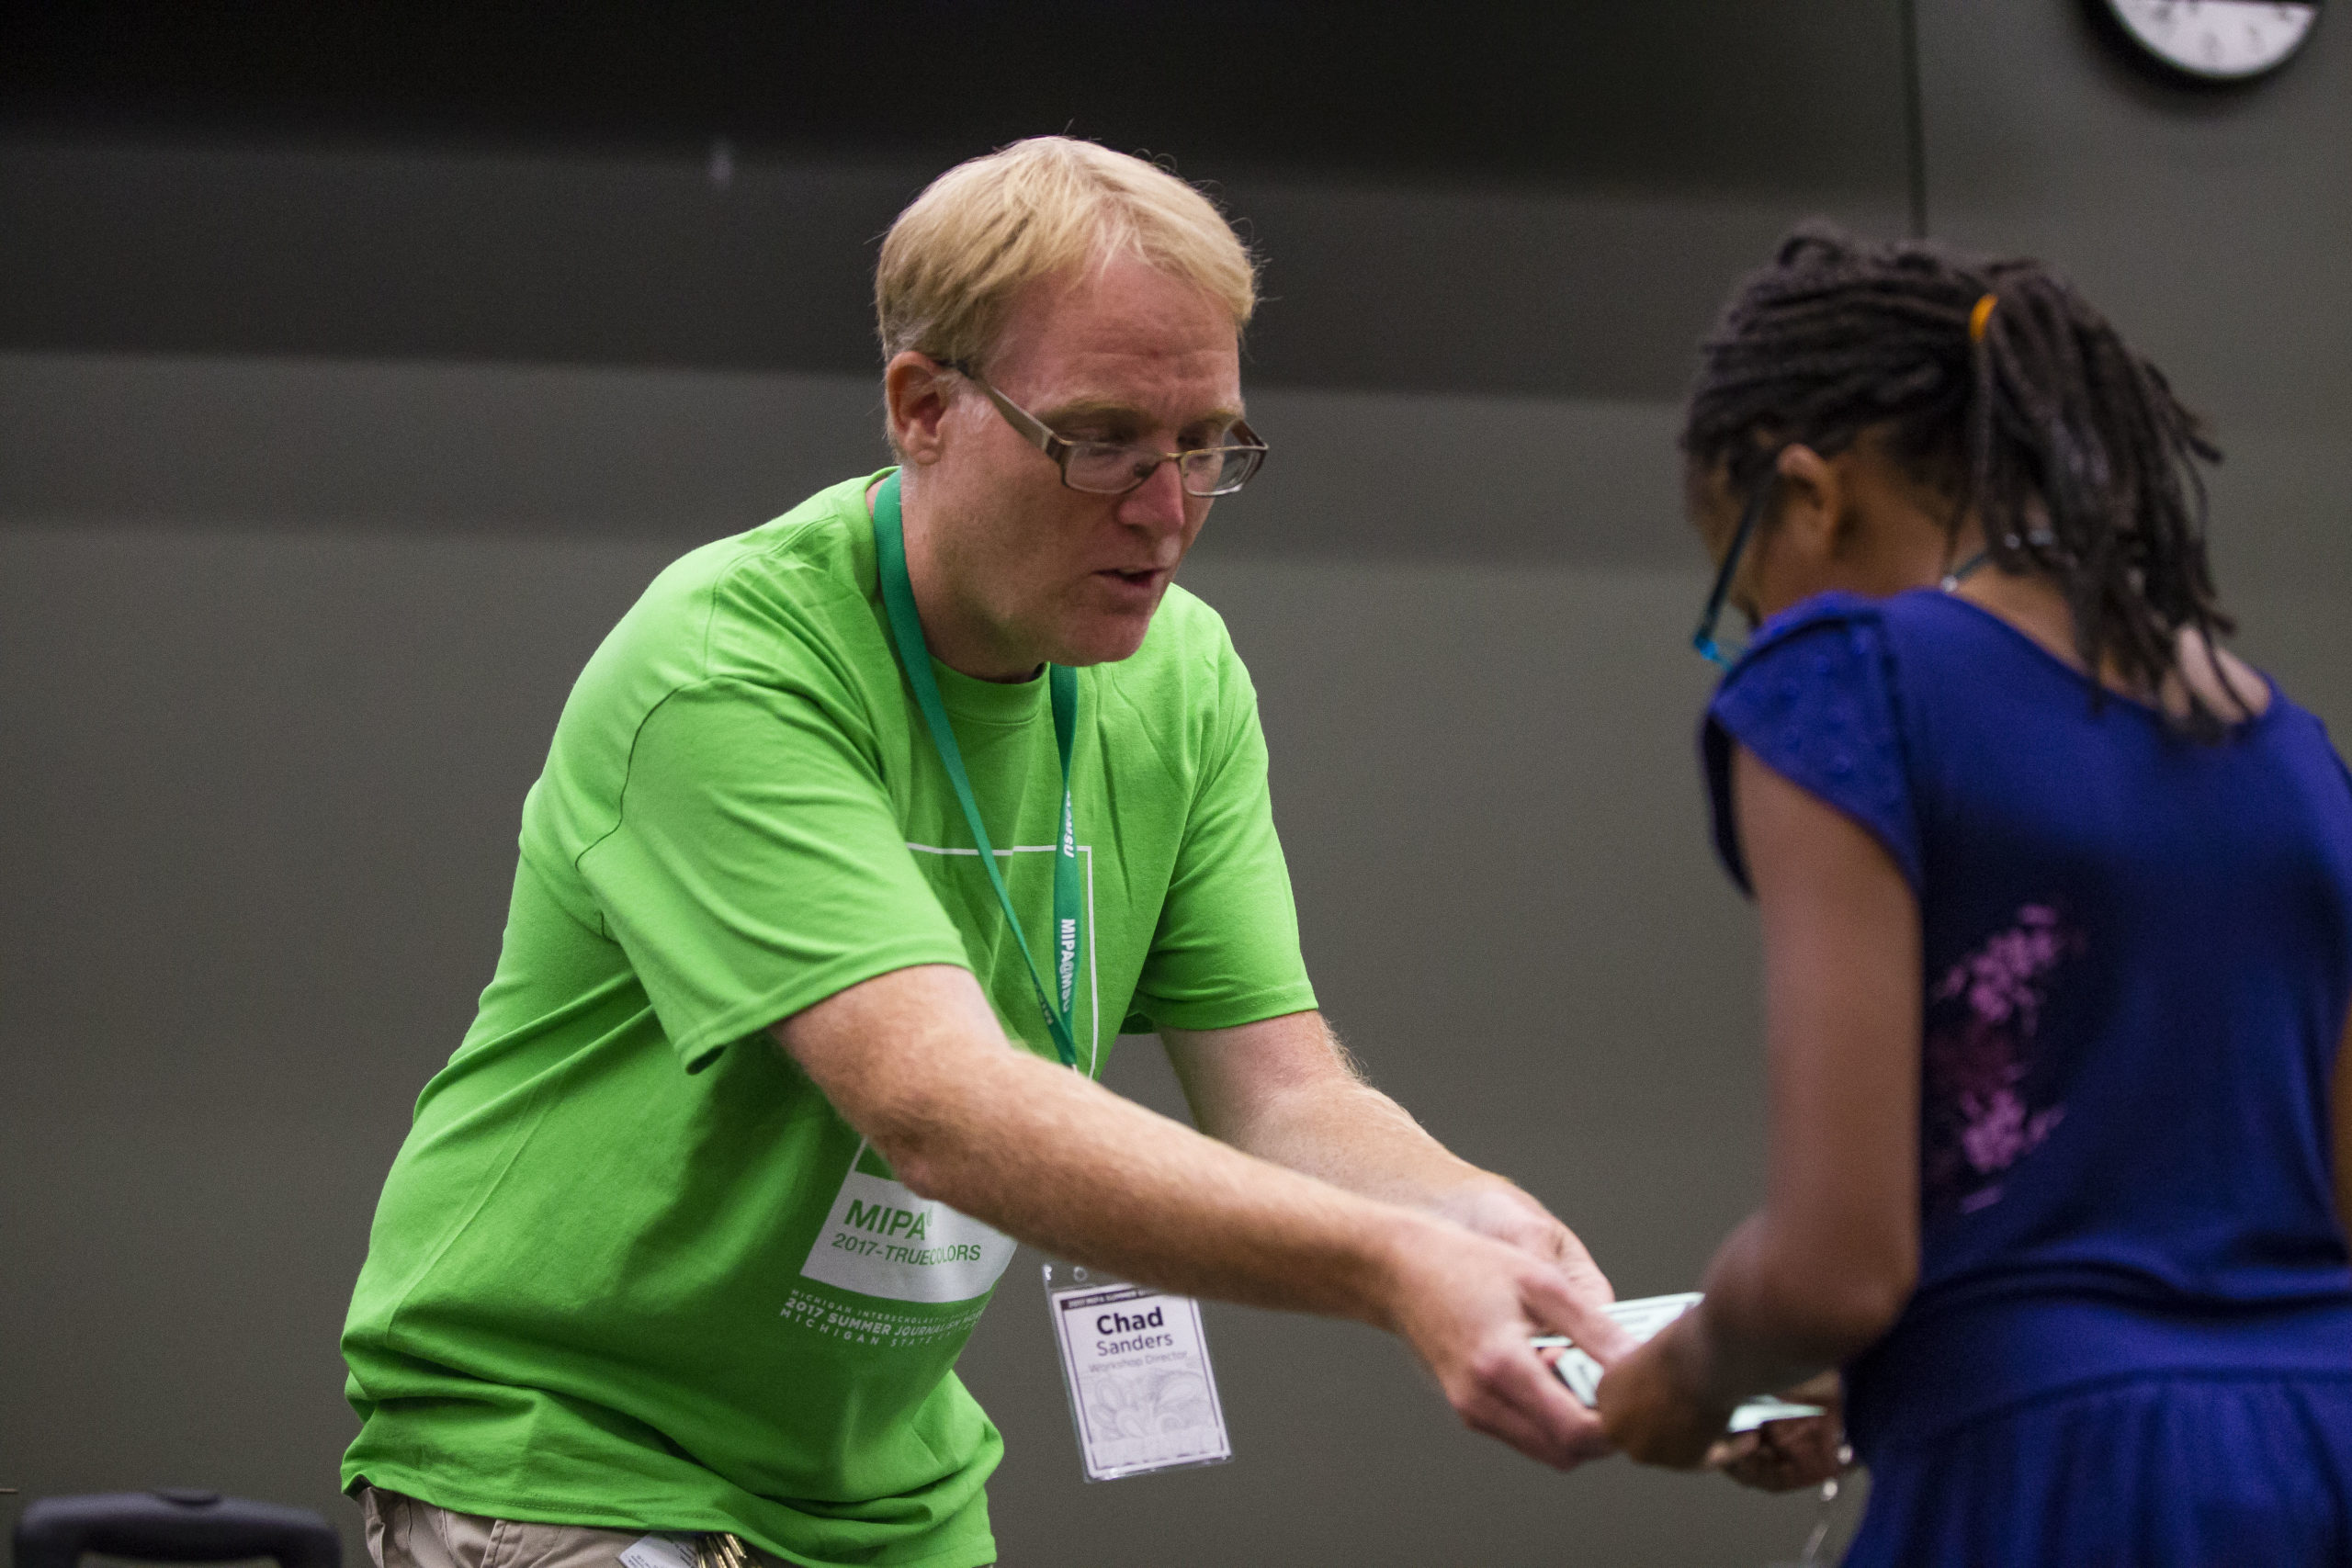 Chad Sanders hands out Chad Change at the opening session of MIPA Camp Sunday, July 30, 2017. MIPA Photo/Michael Caterina